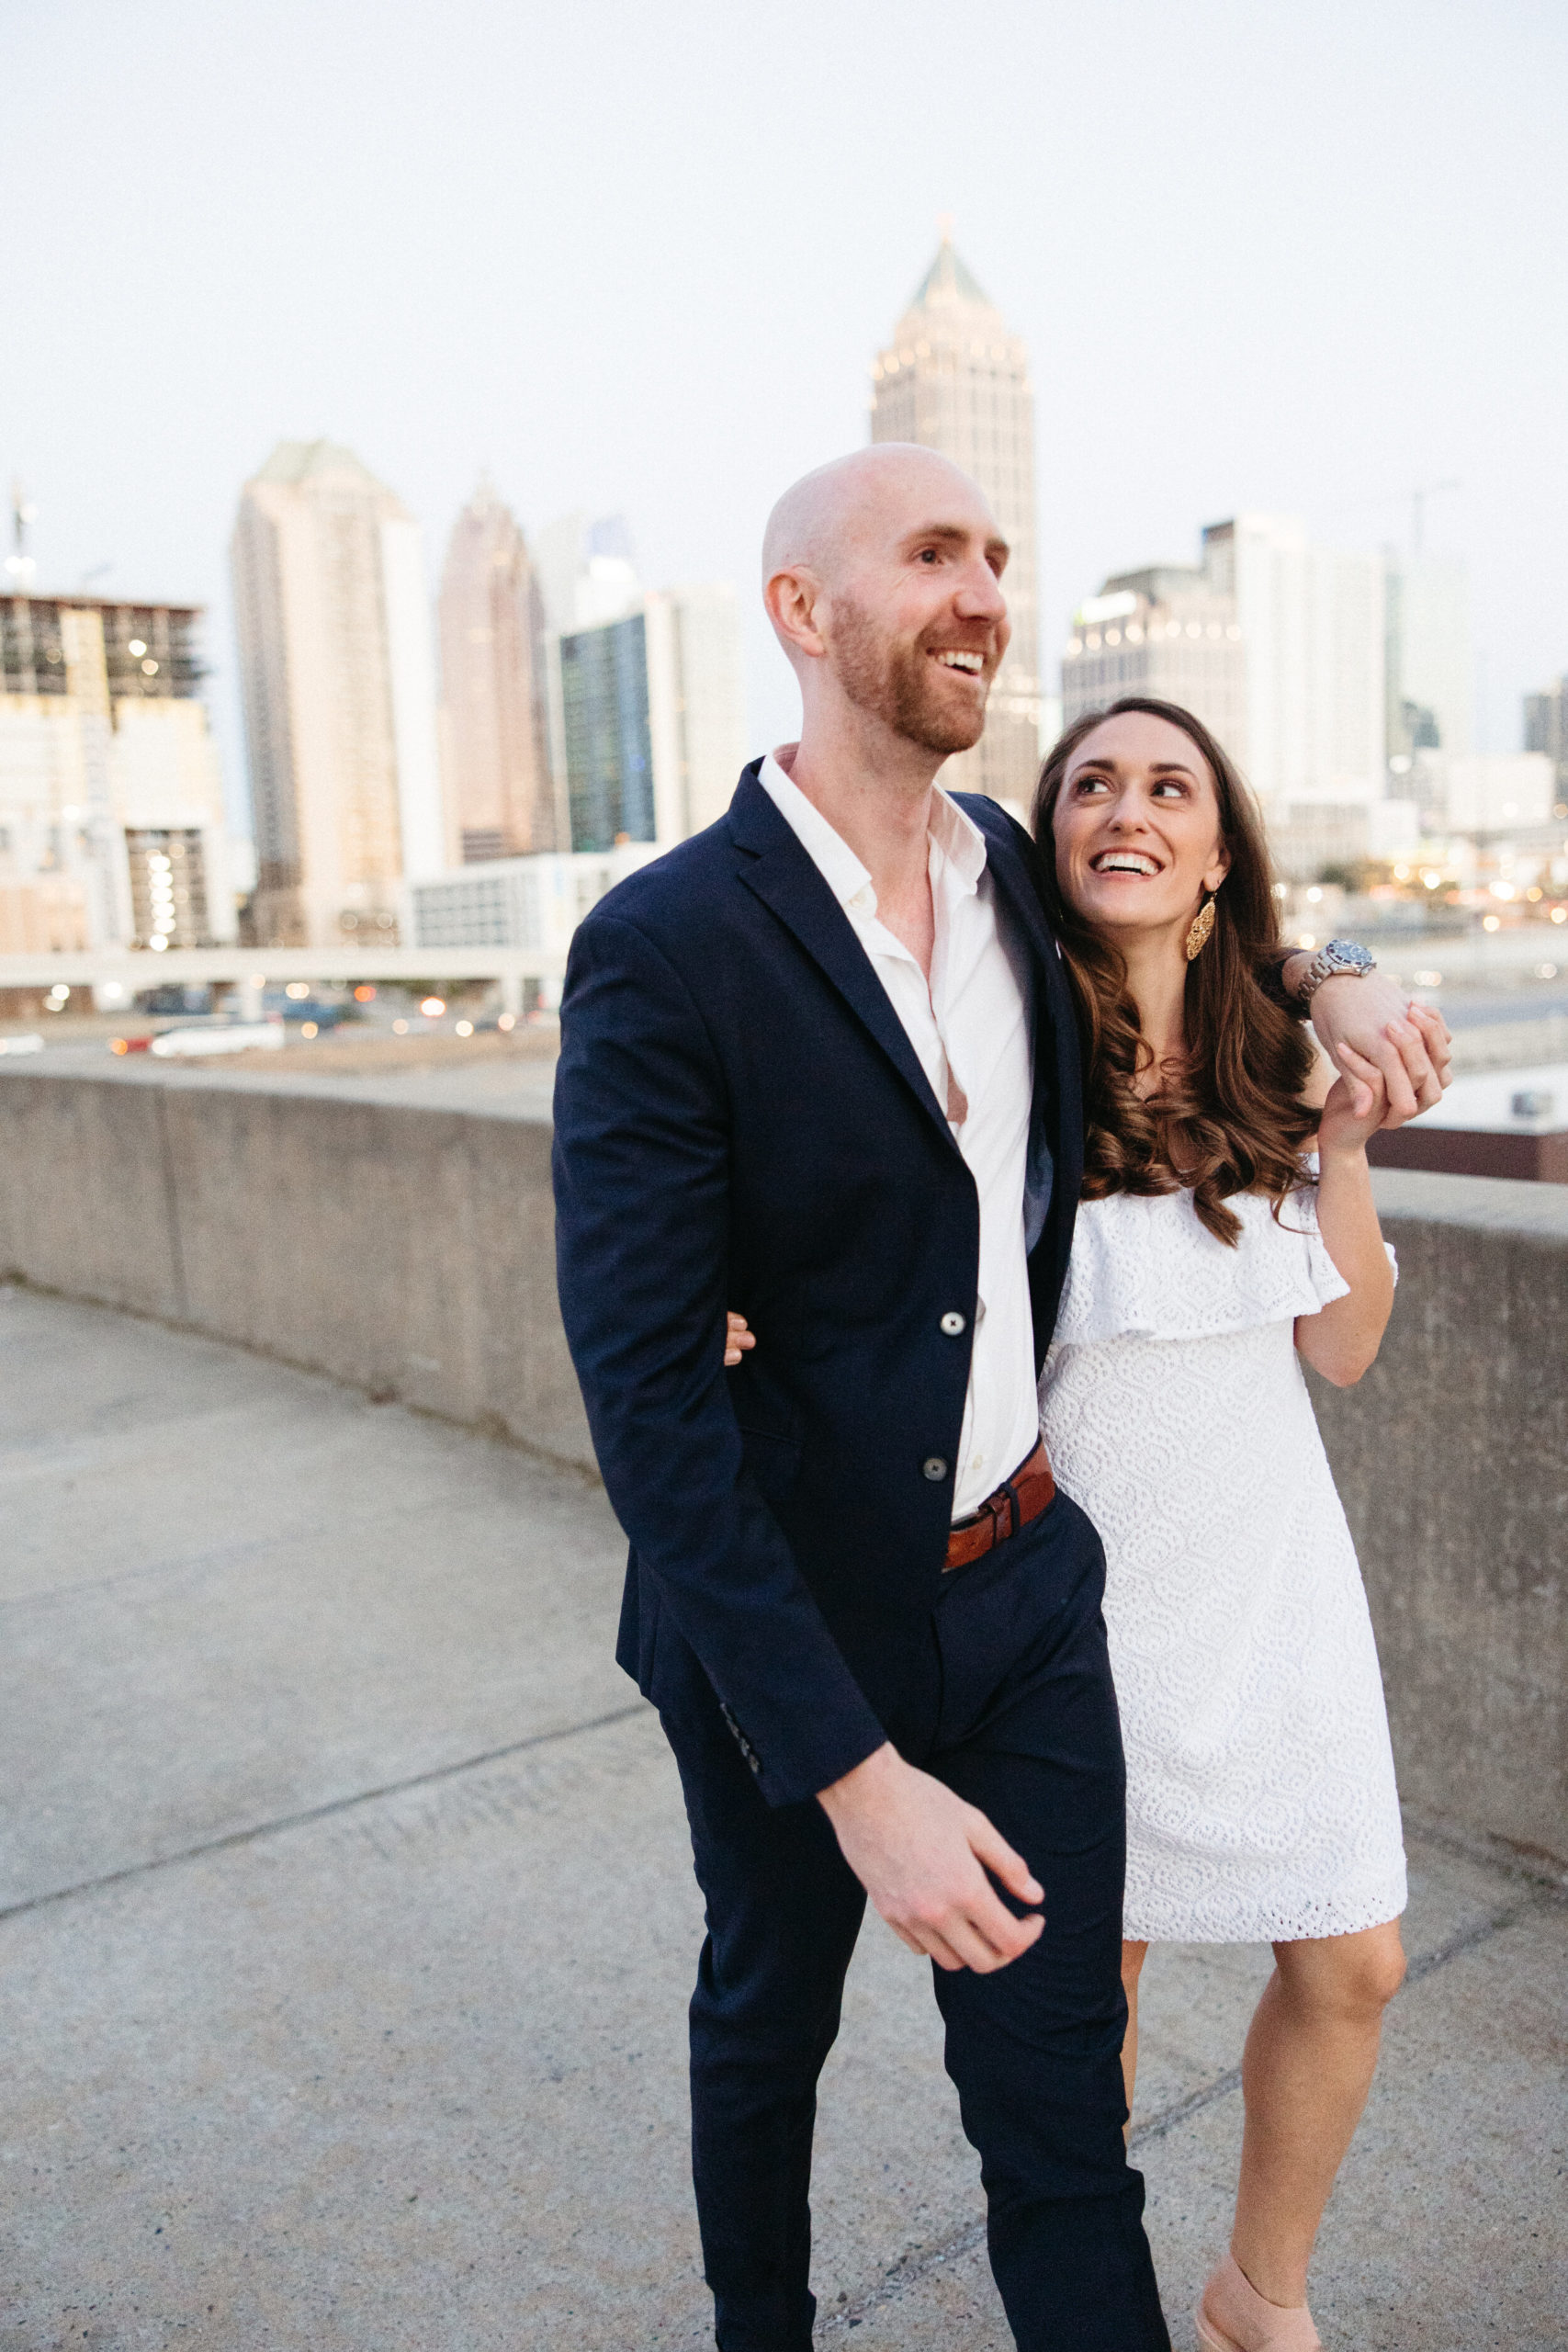 A Day In The Life | from at home to a romp around the city | ATL Engagement Photographer